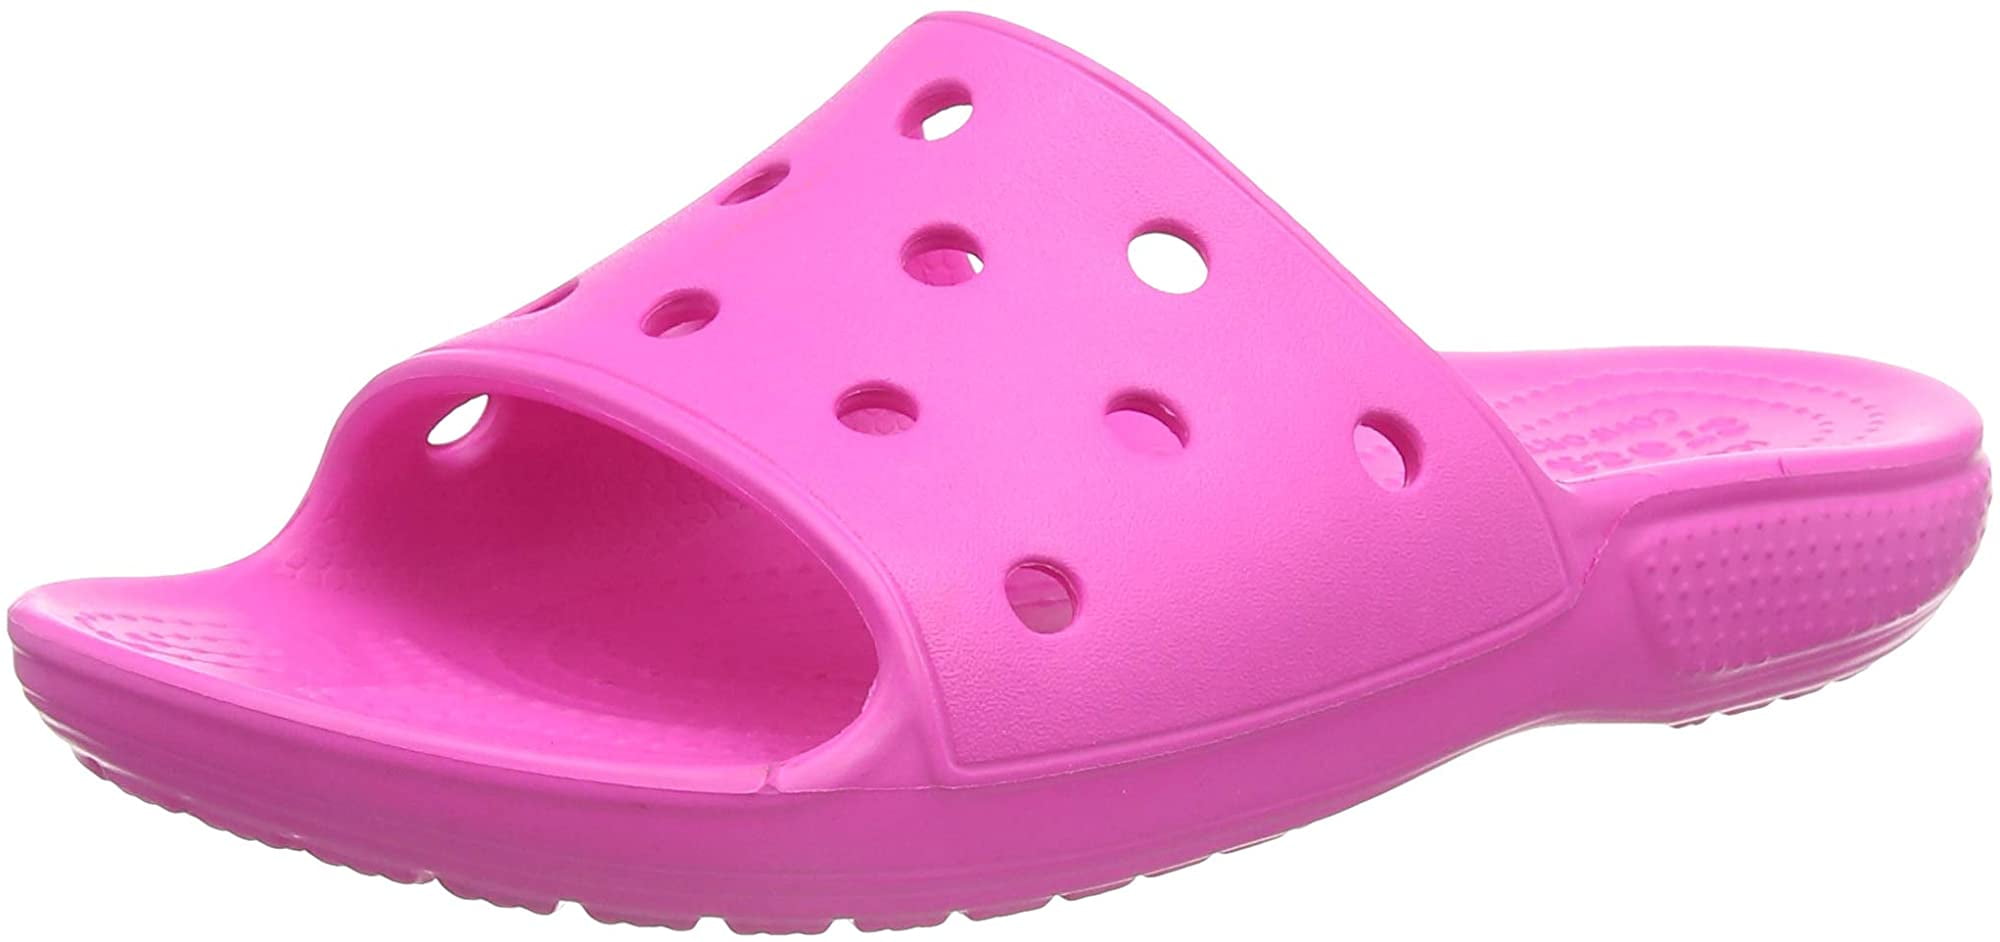 Crocs Kids Classic Slide Sandals Slip On Water Shoes for Boys and Girls 